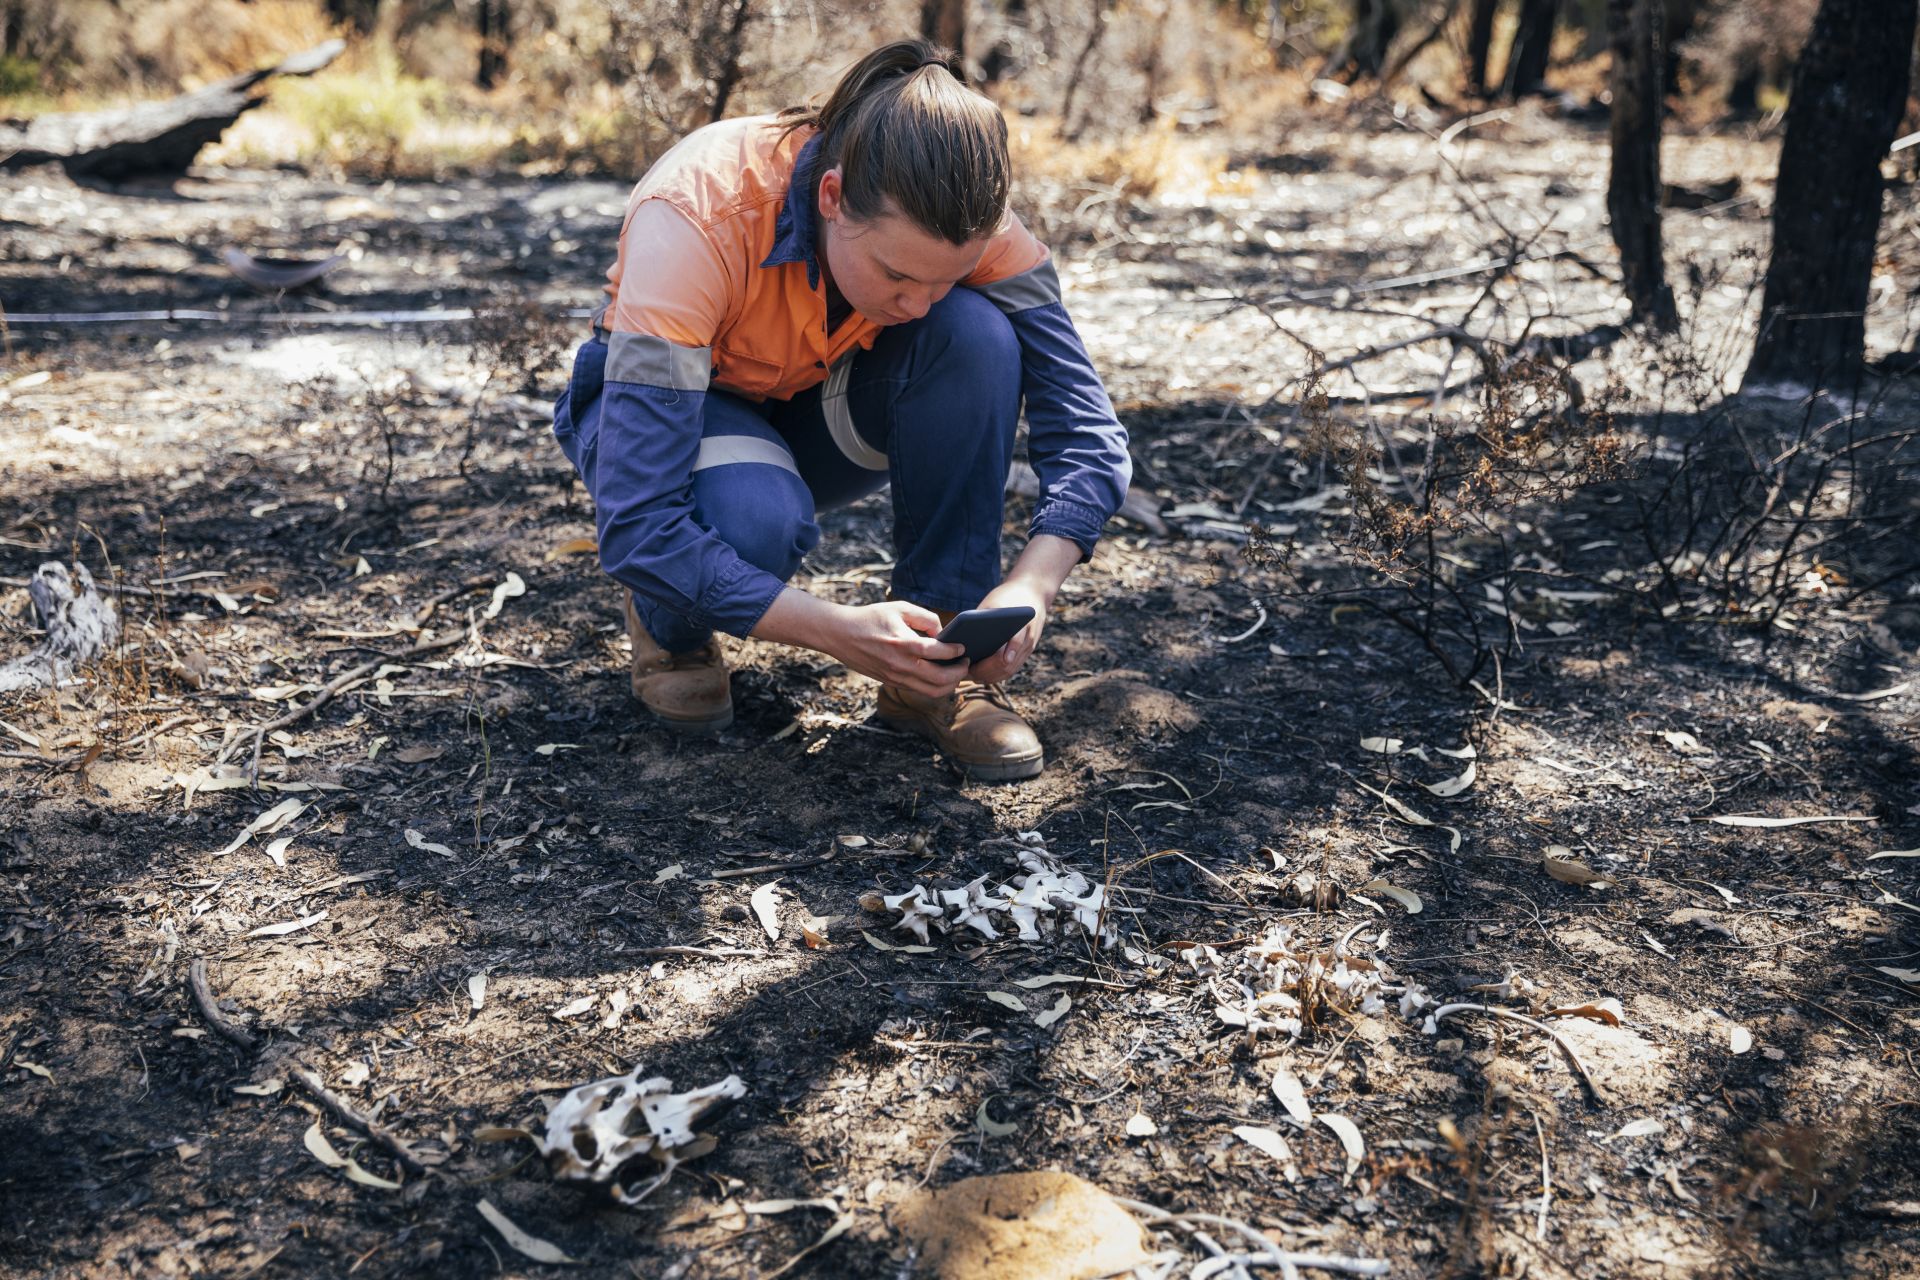 Person crouched down taking a photo of some bones on the ground in the bush